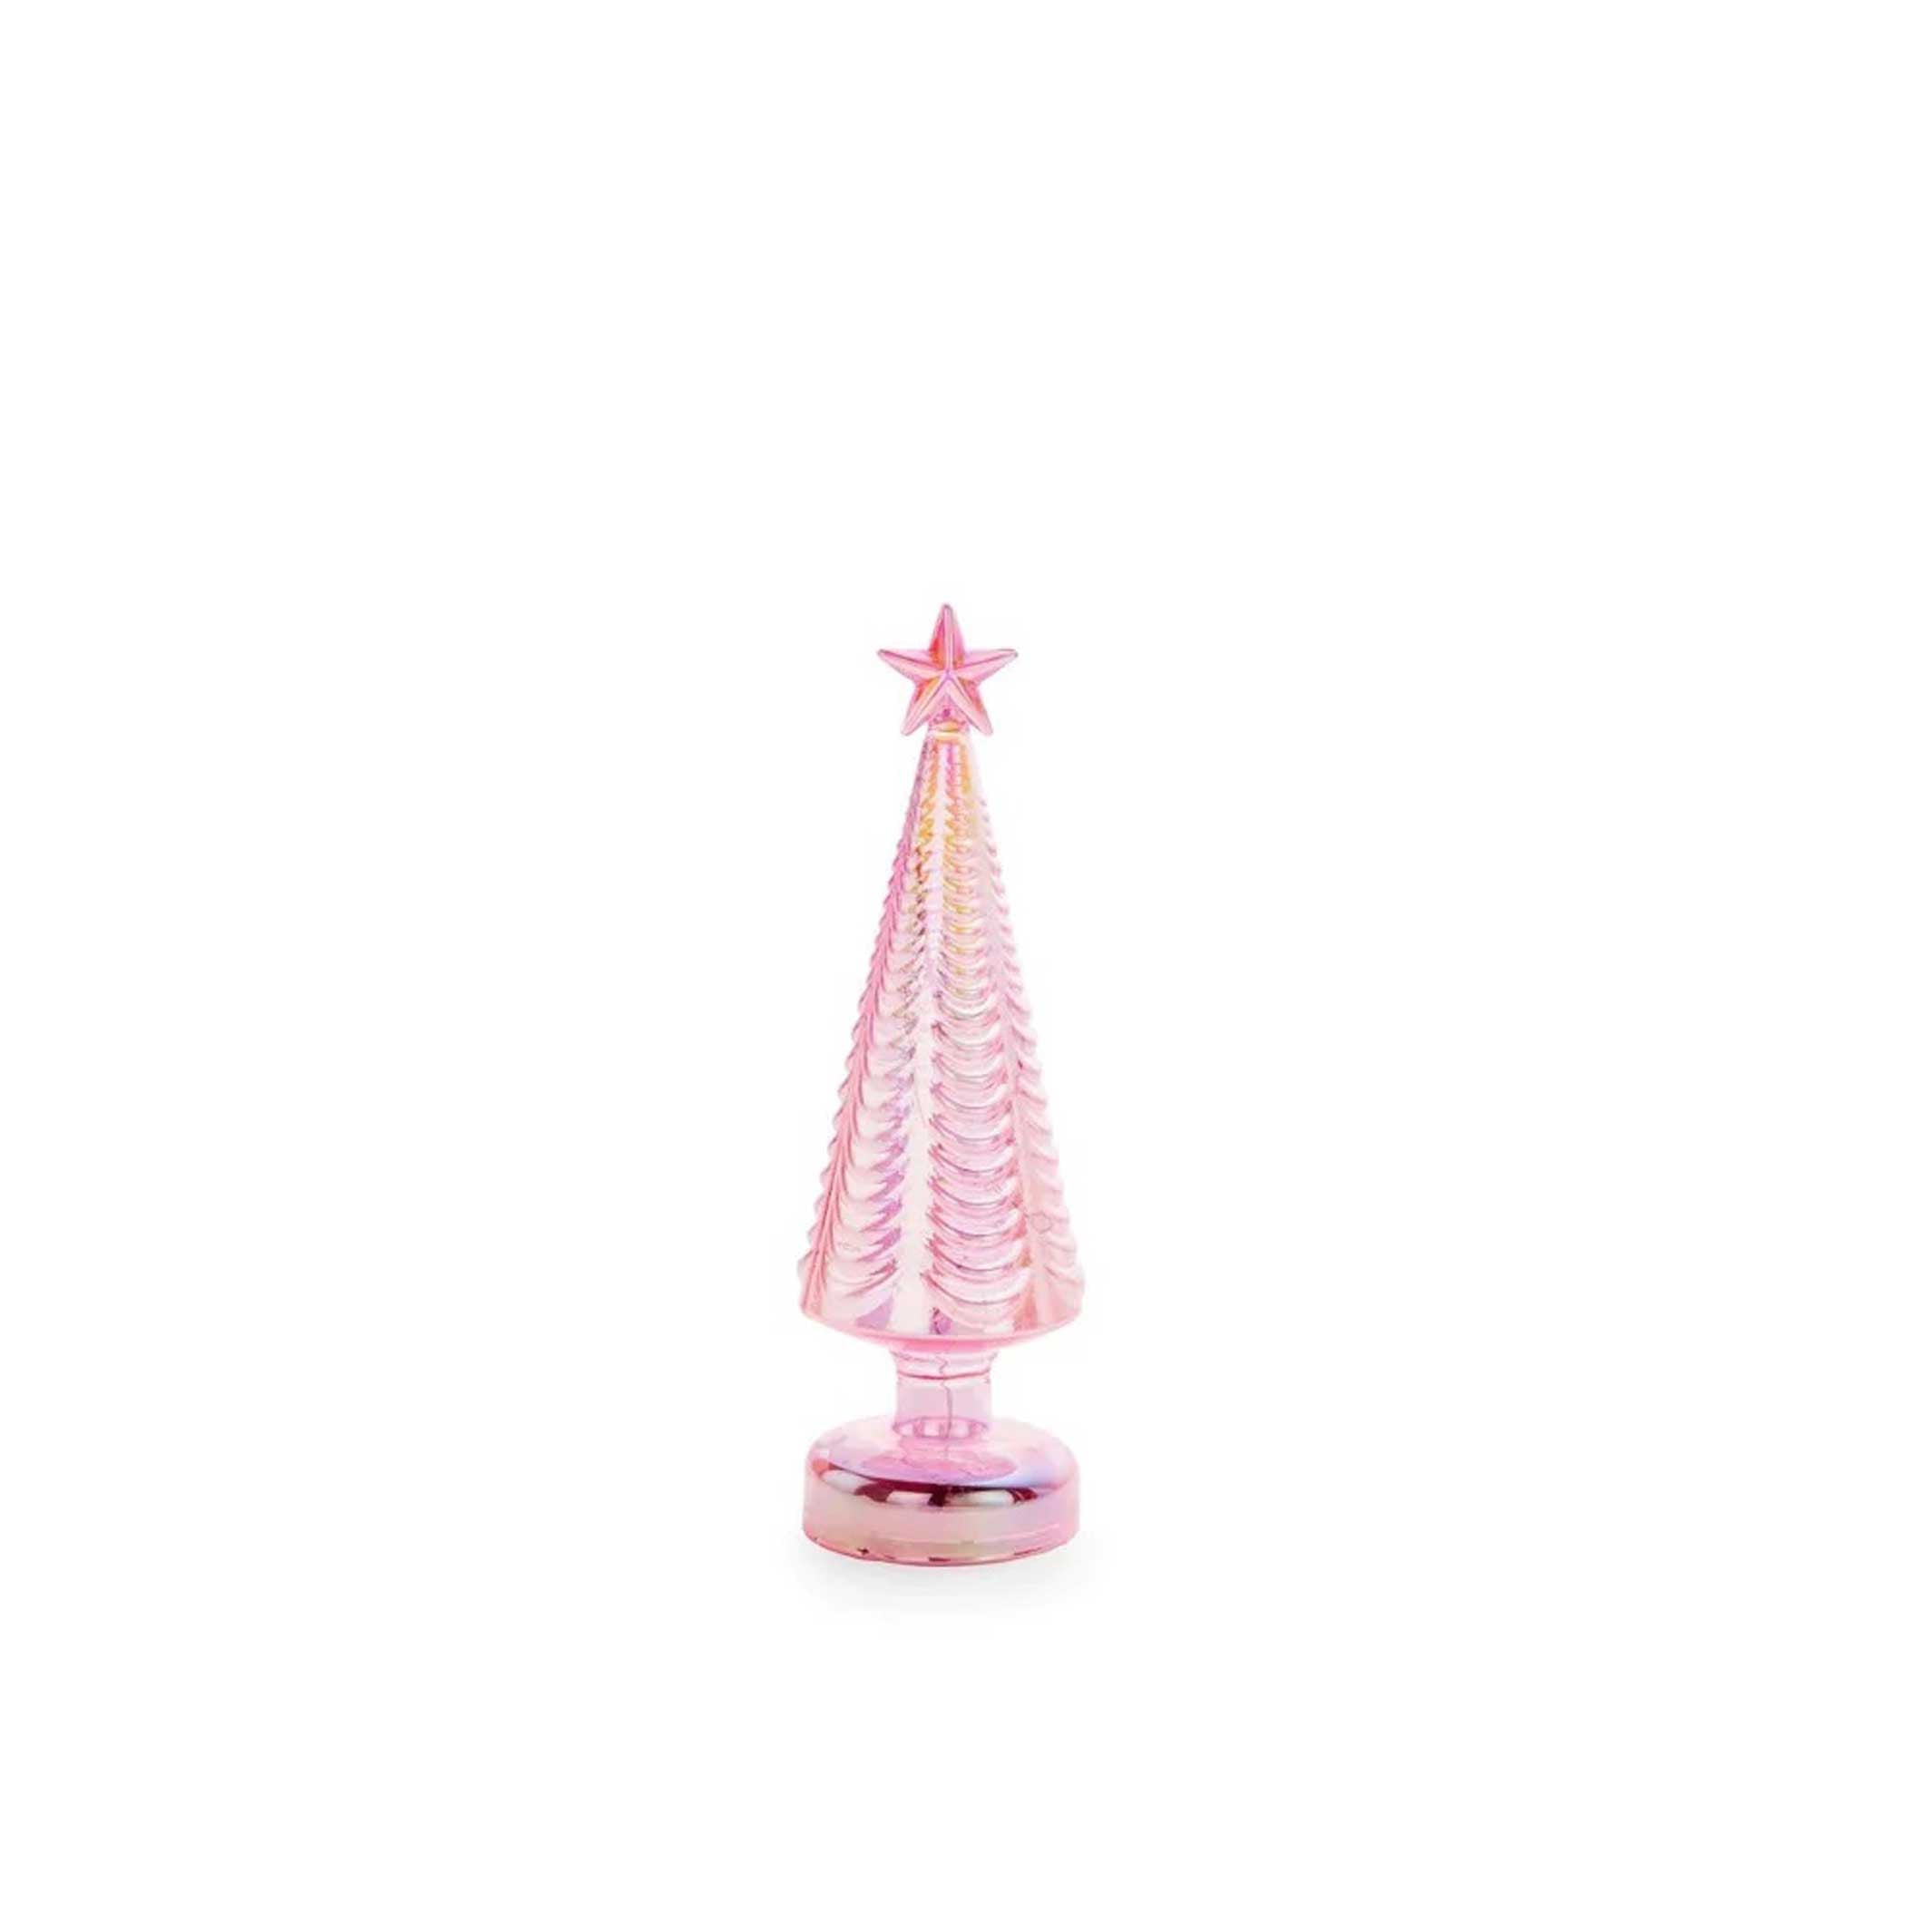 PINK STAR | LED lighted glass TREE | 23 cm high | MoMA